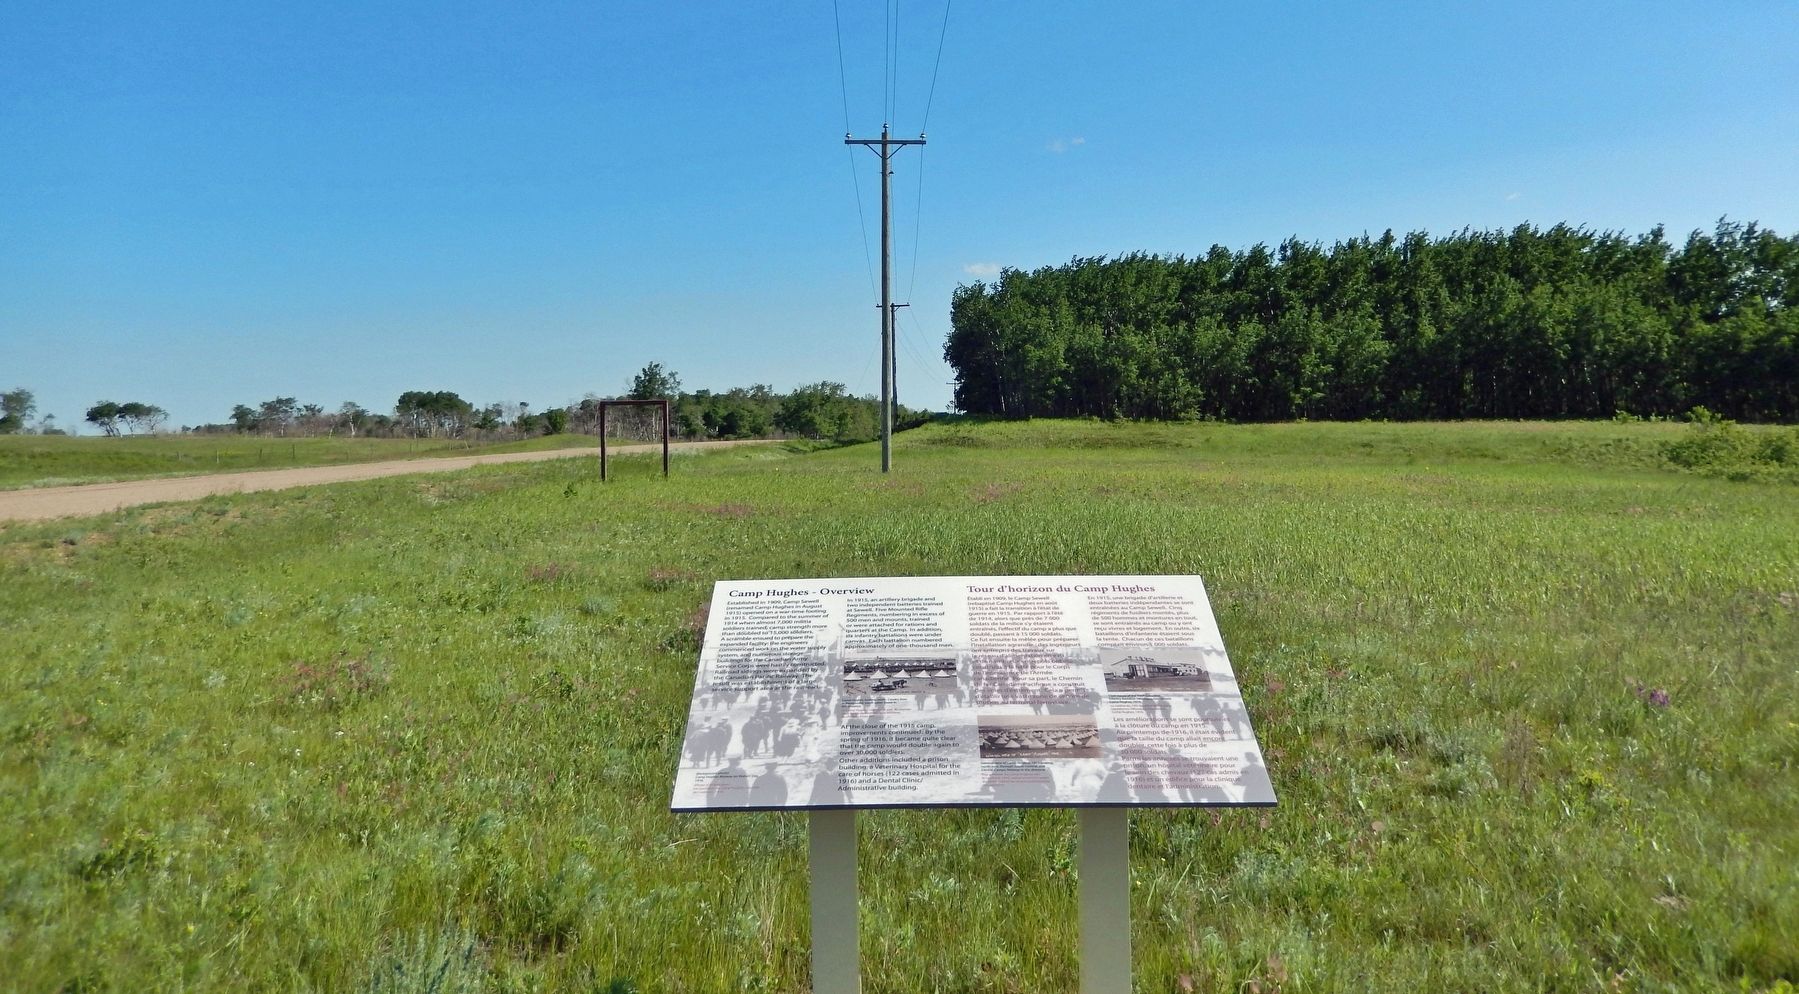 Camp Hughes  Overview / Tour d'horizon du Camp Hughes Marker image. Click for full size.